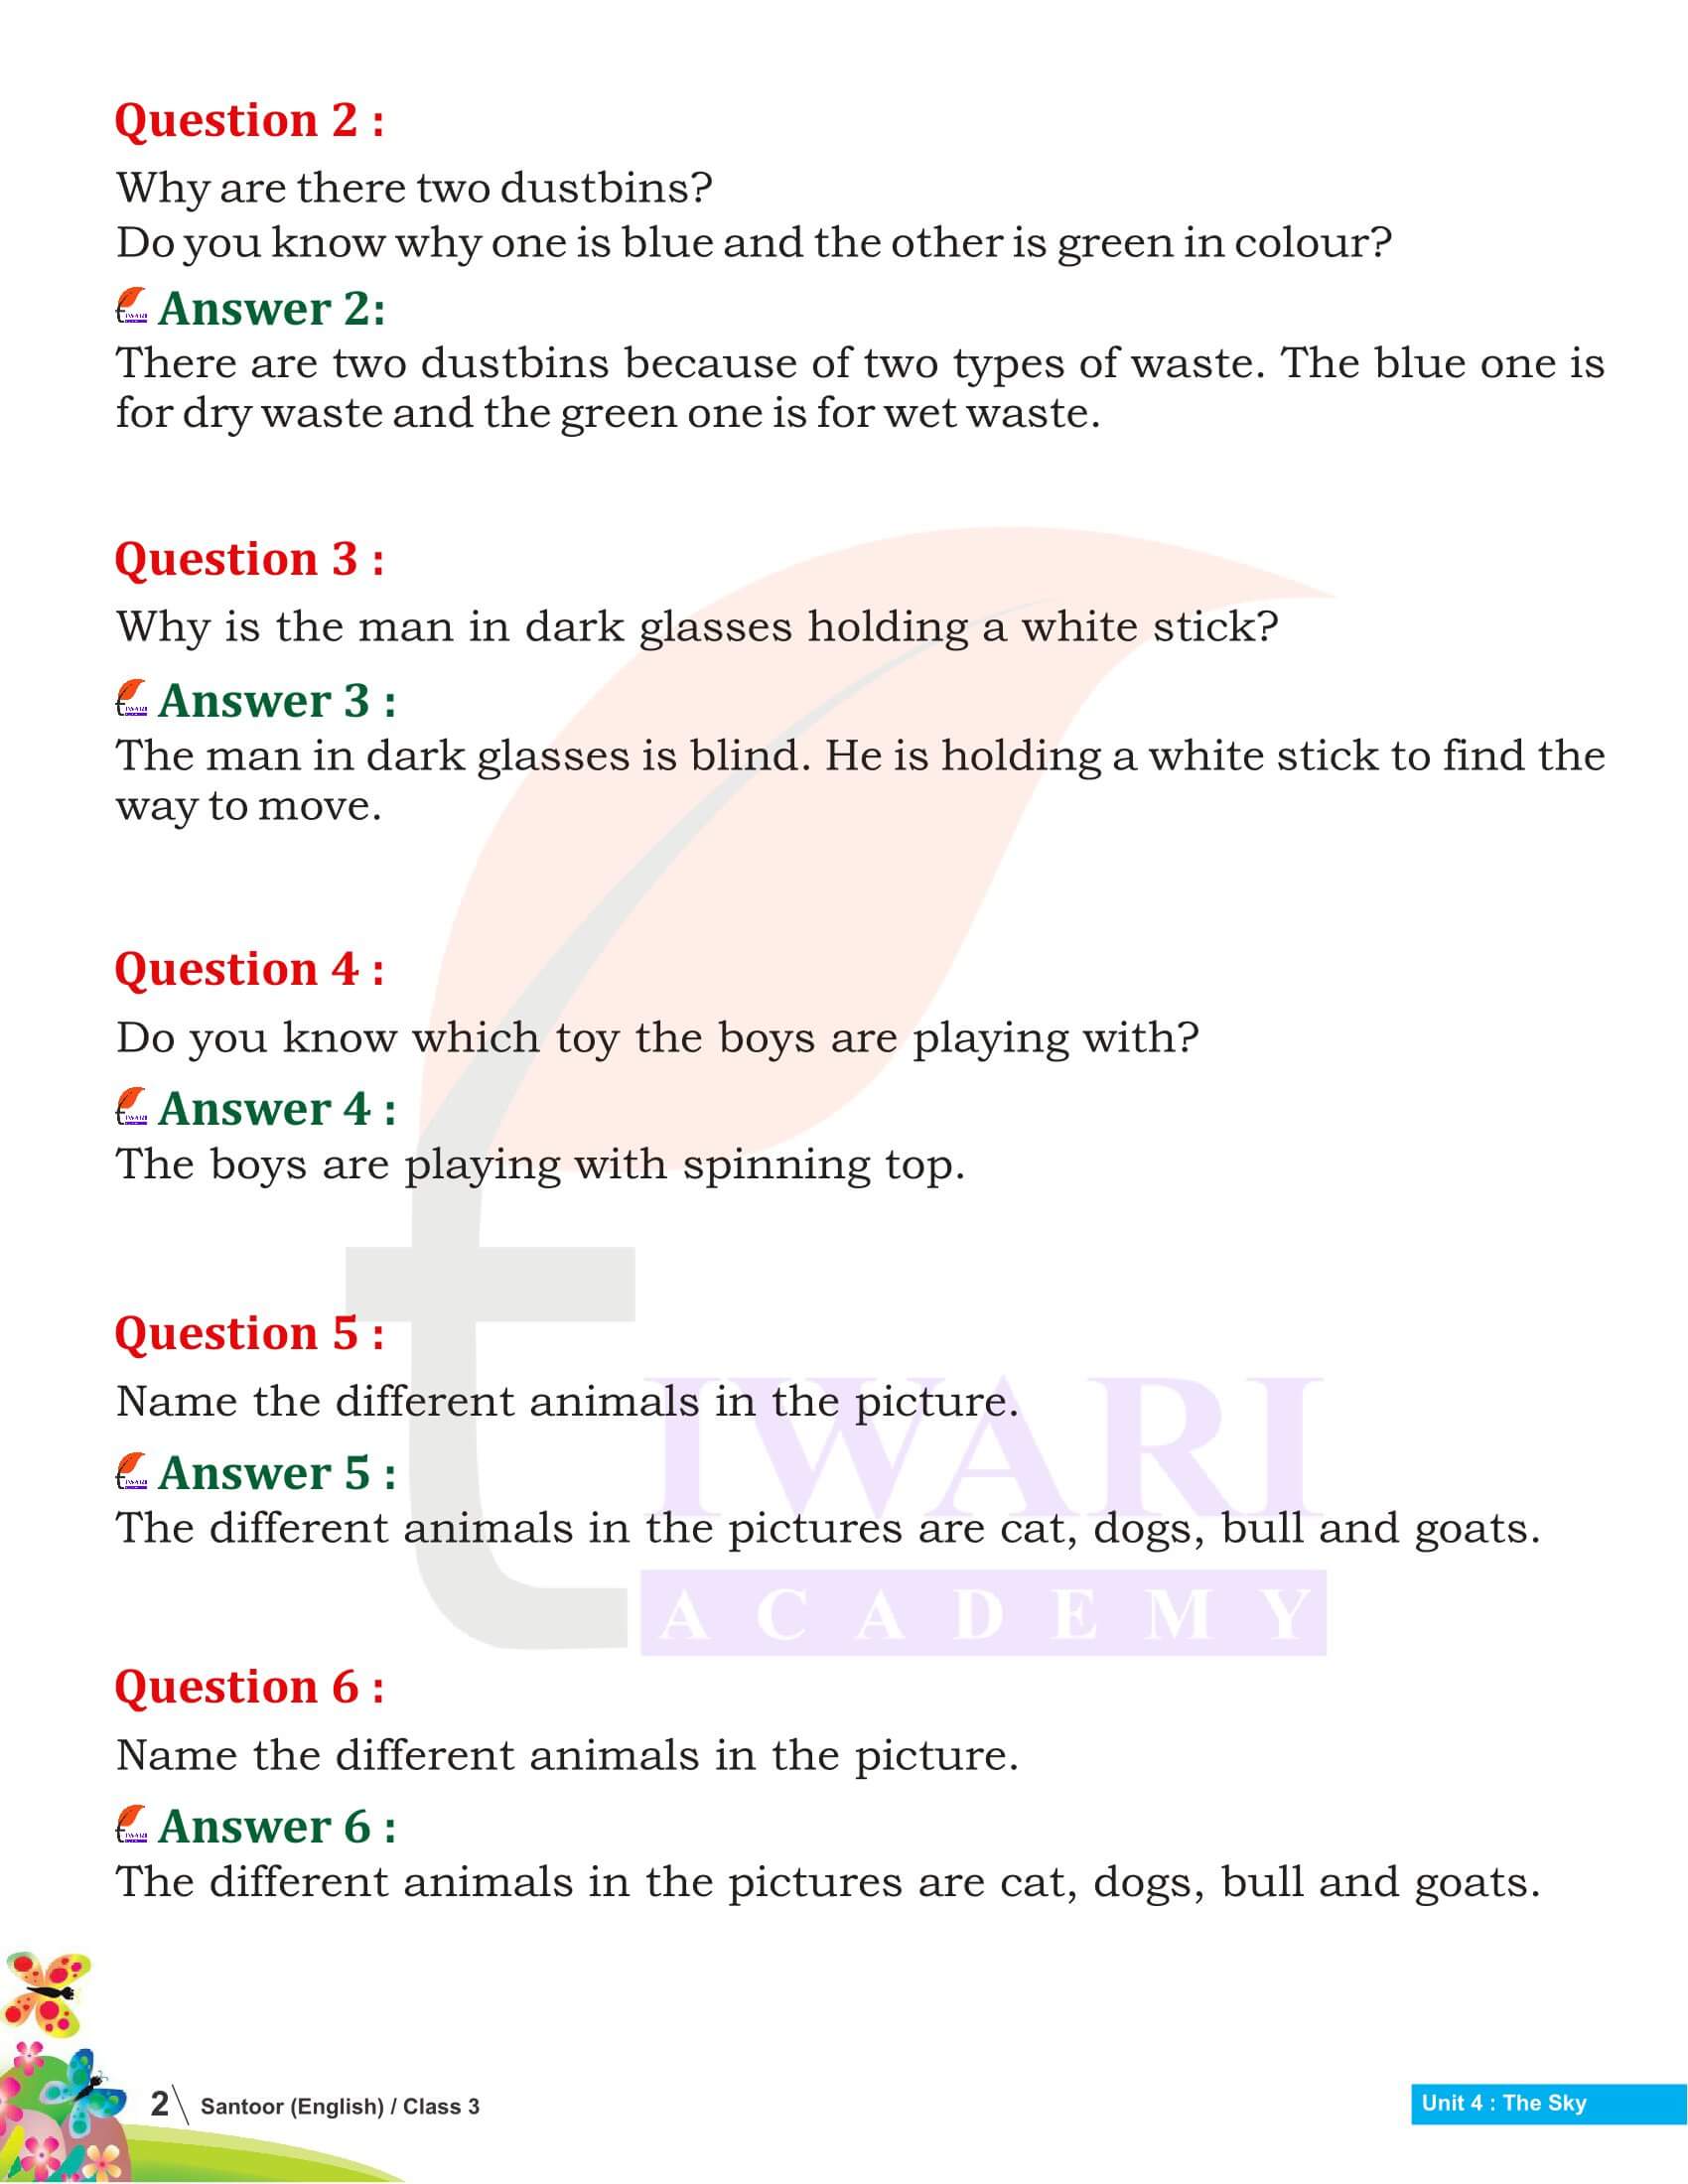 NCERT Solutions for Class 3 English Santoor Chapter 10 Answers